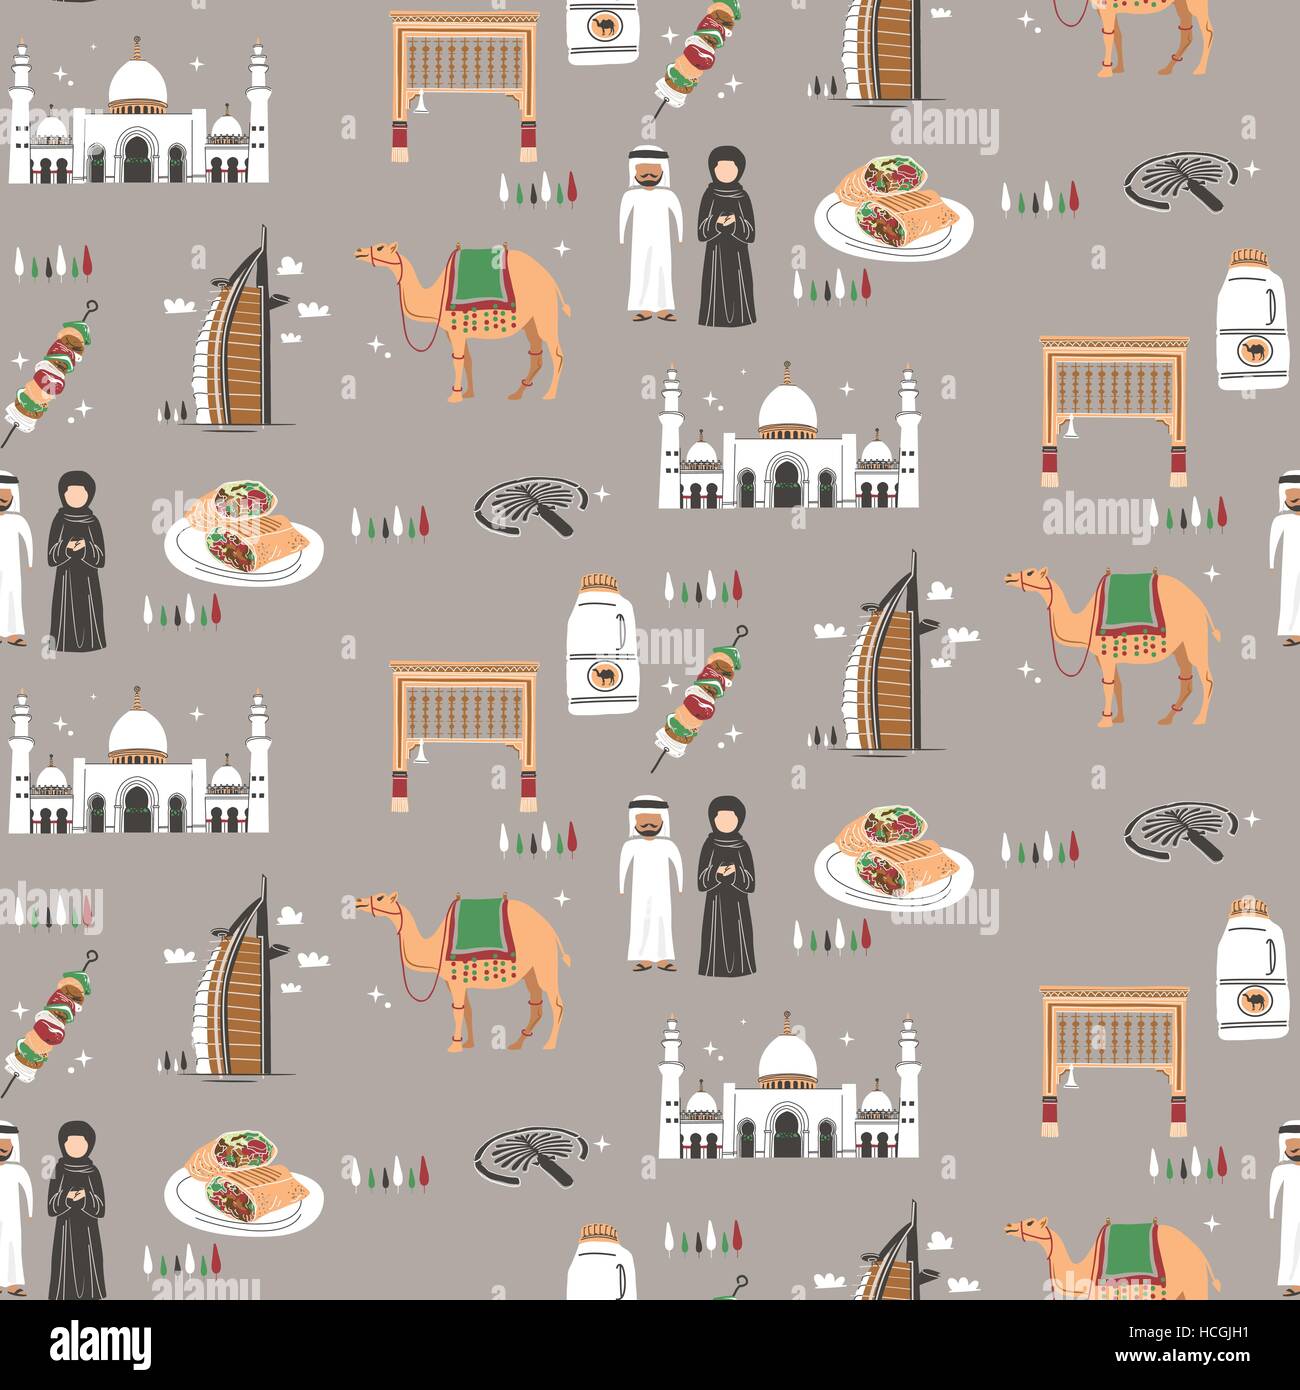 Seamless pattern of Dubai travel concept in flat design style Stock Vector